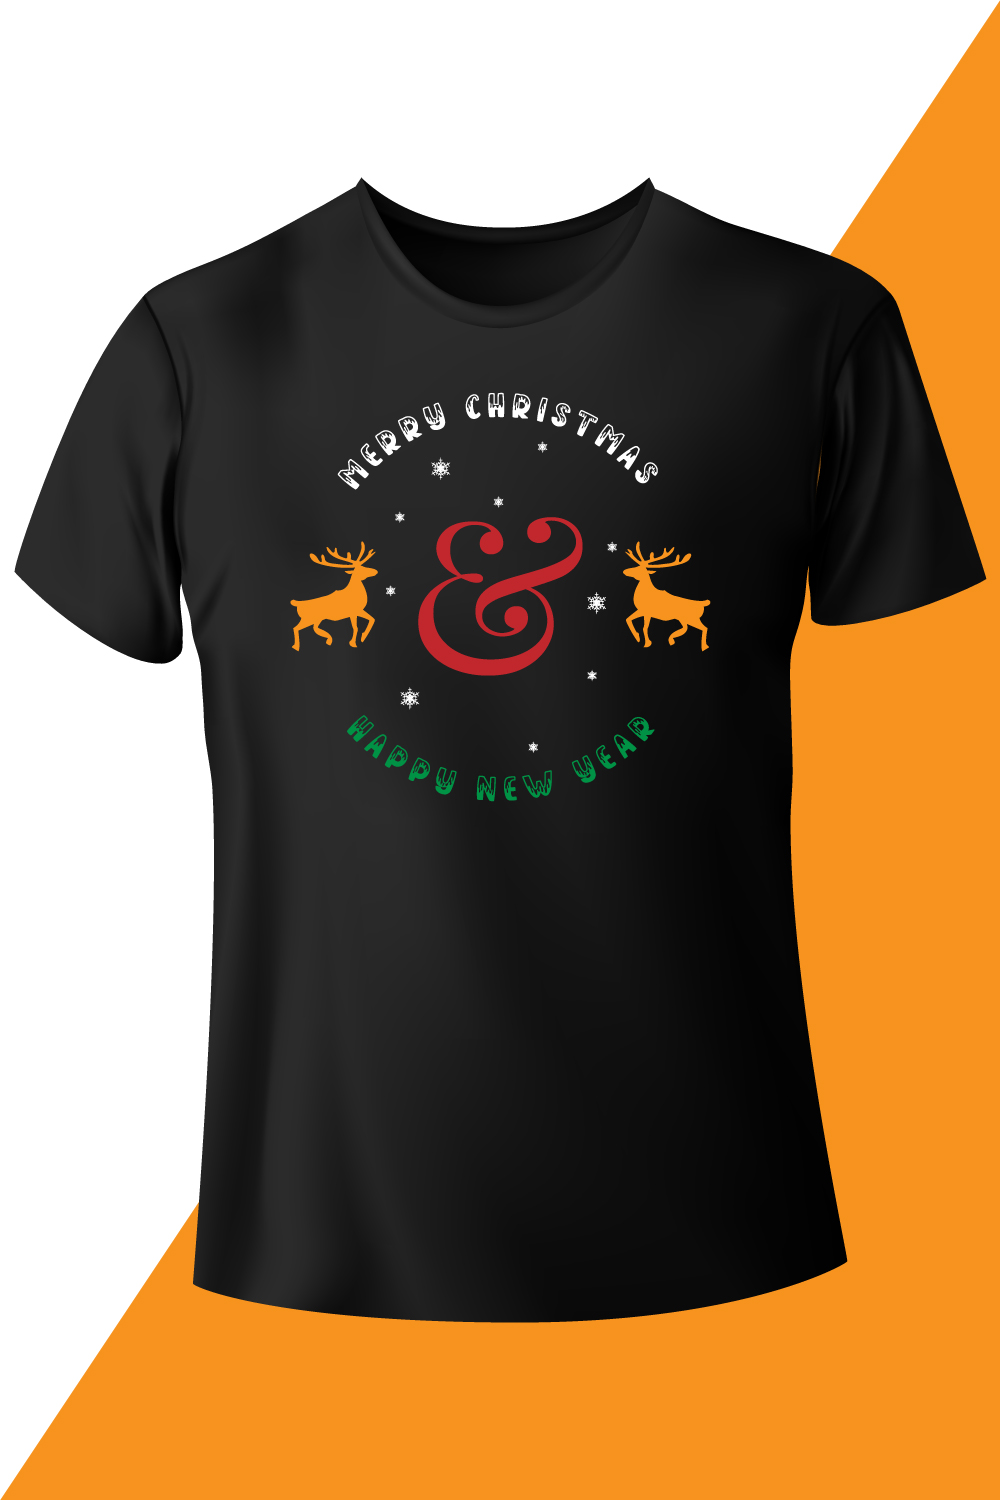 Image of a black t-shirt with an irresistible inscription happy new year.